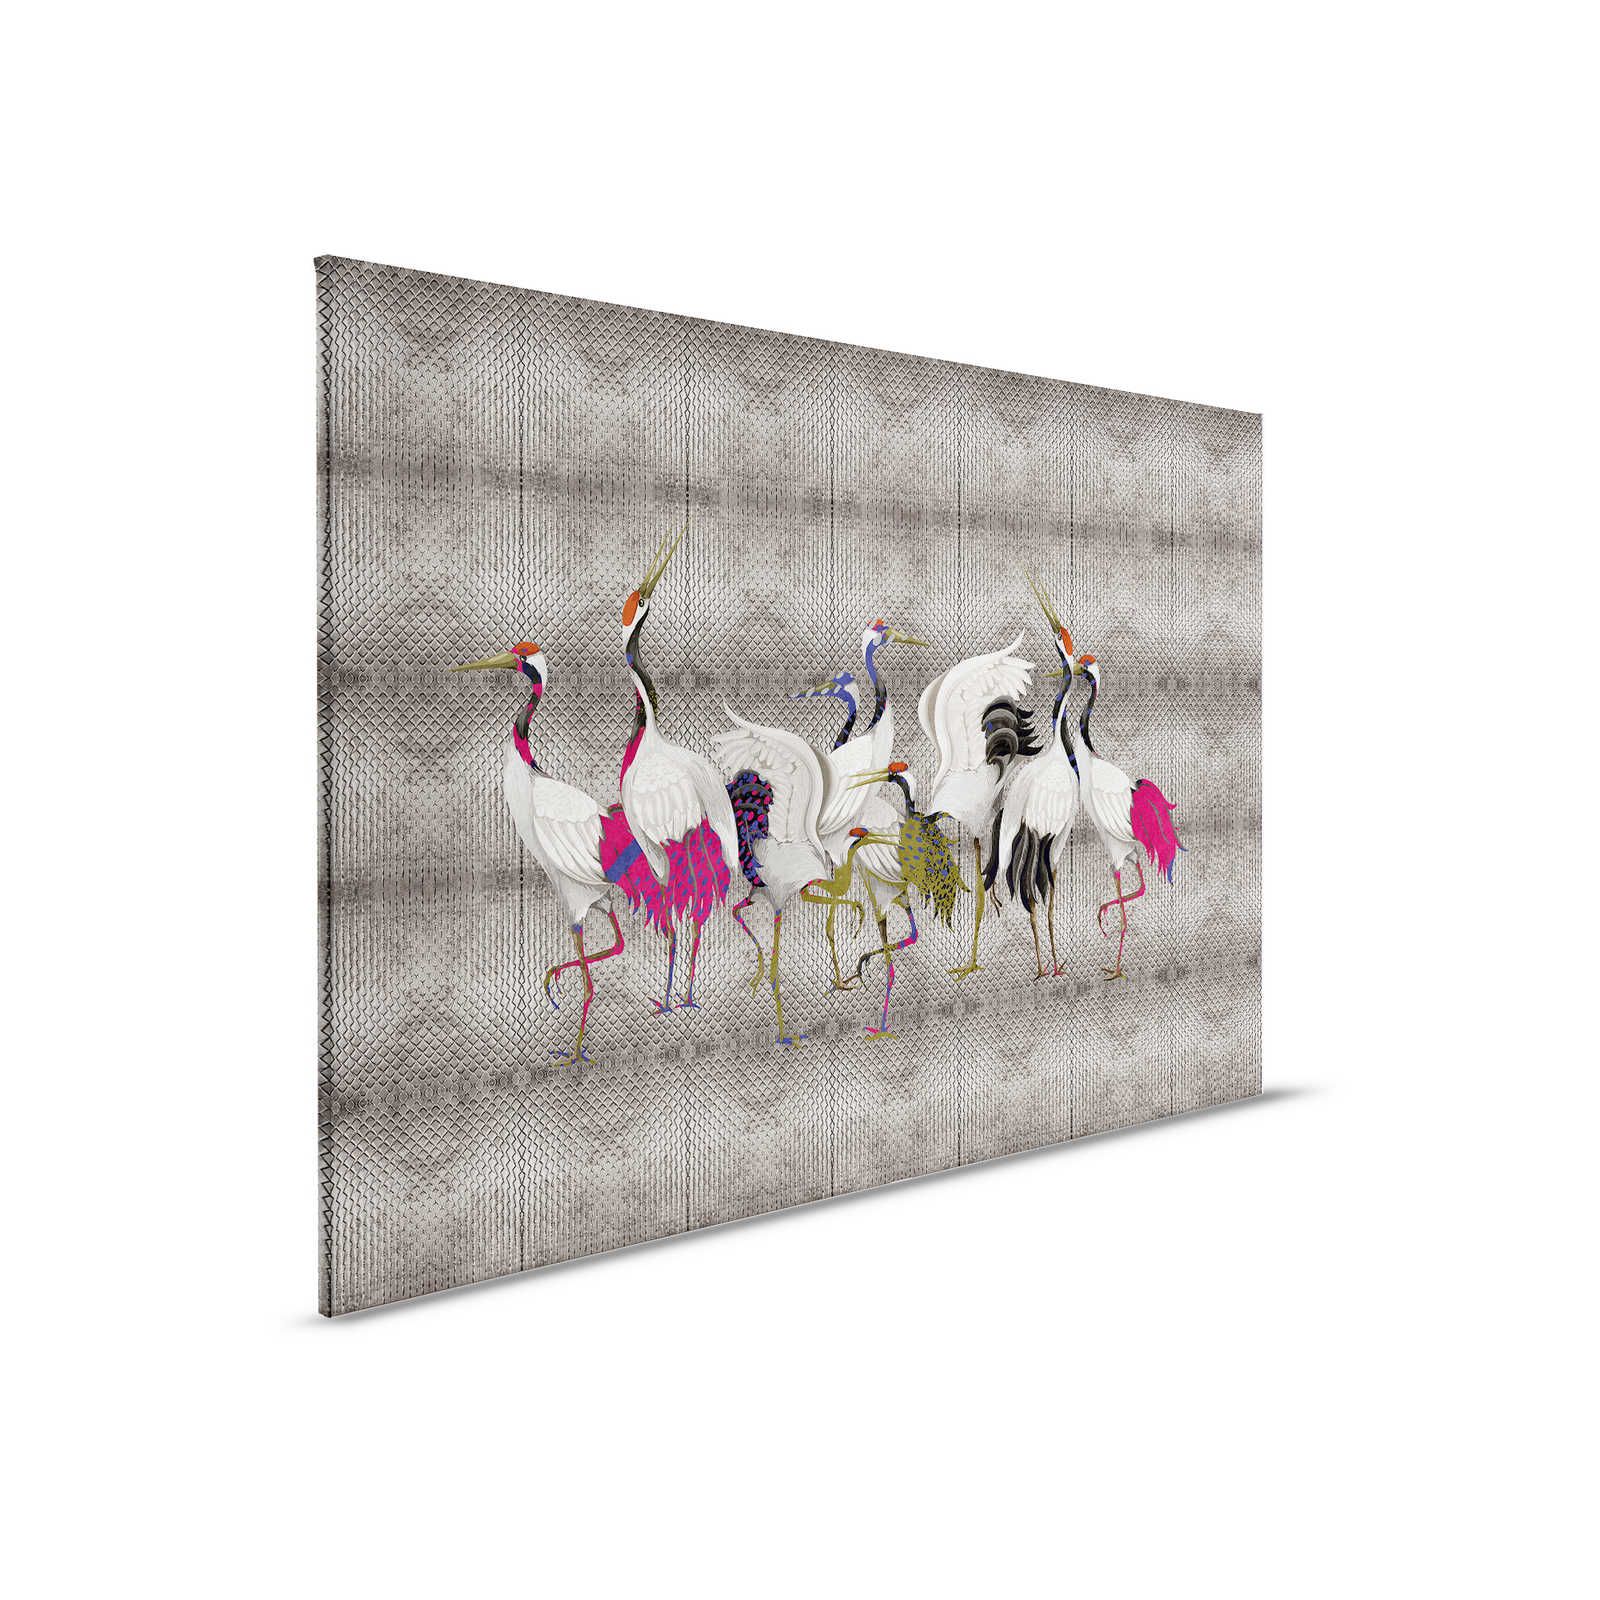         Land of Happiness 3 - Metallic Canvas Painting Silver with Colourful Crane Motif - 0.90 m x 0.60 m
    